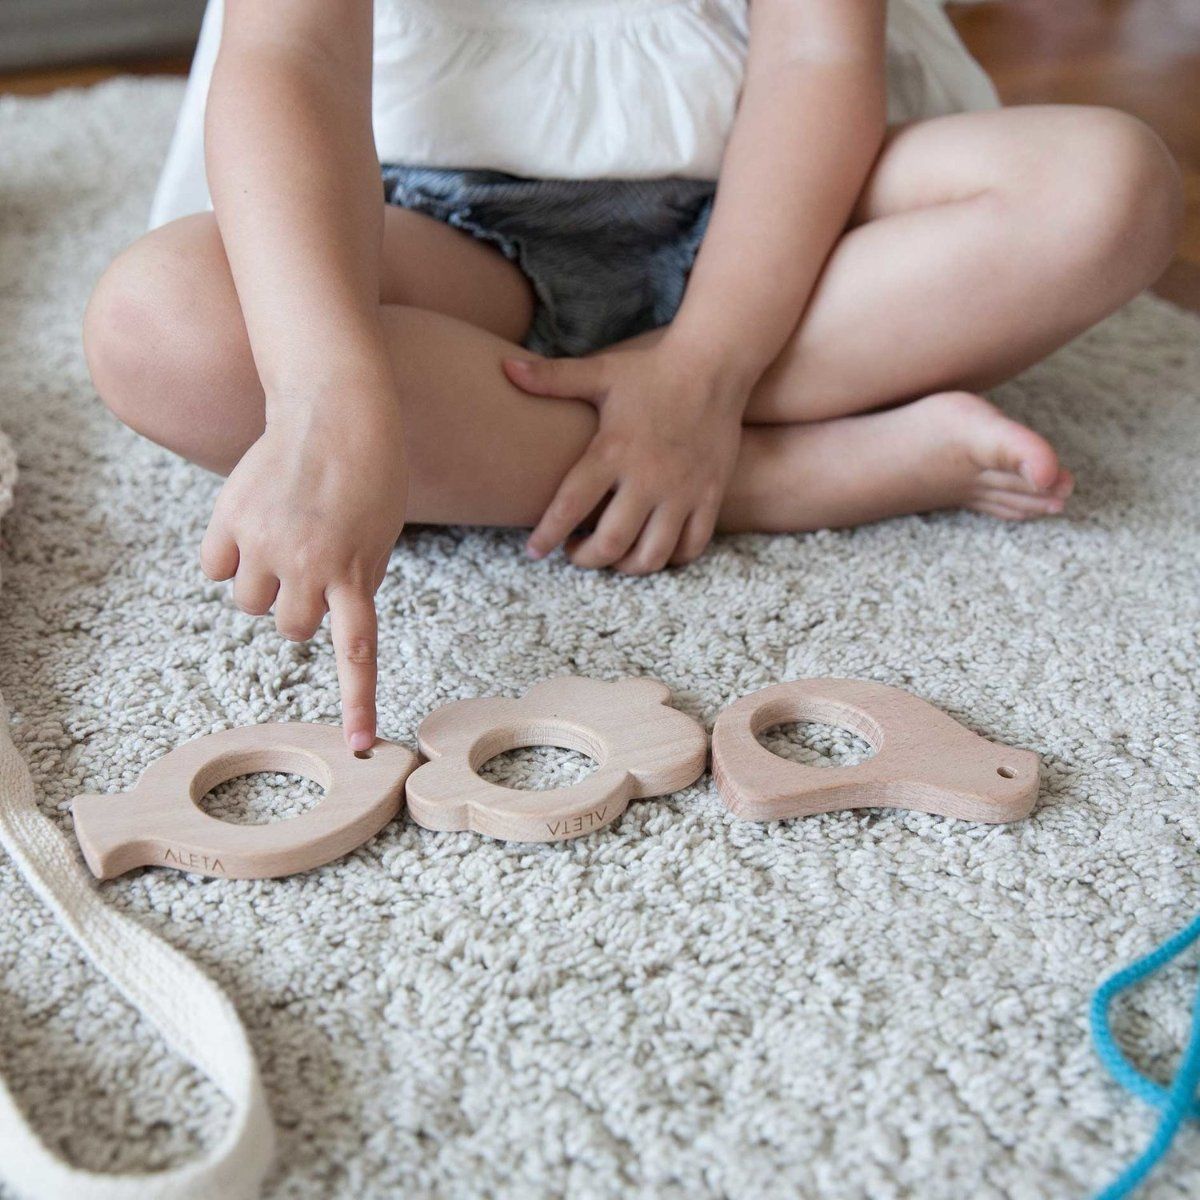 Eco Natural Wooden Baby Teether | Soother - Cloud - Bluebrontide